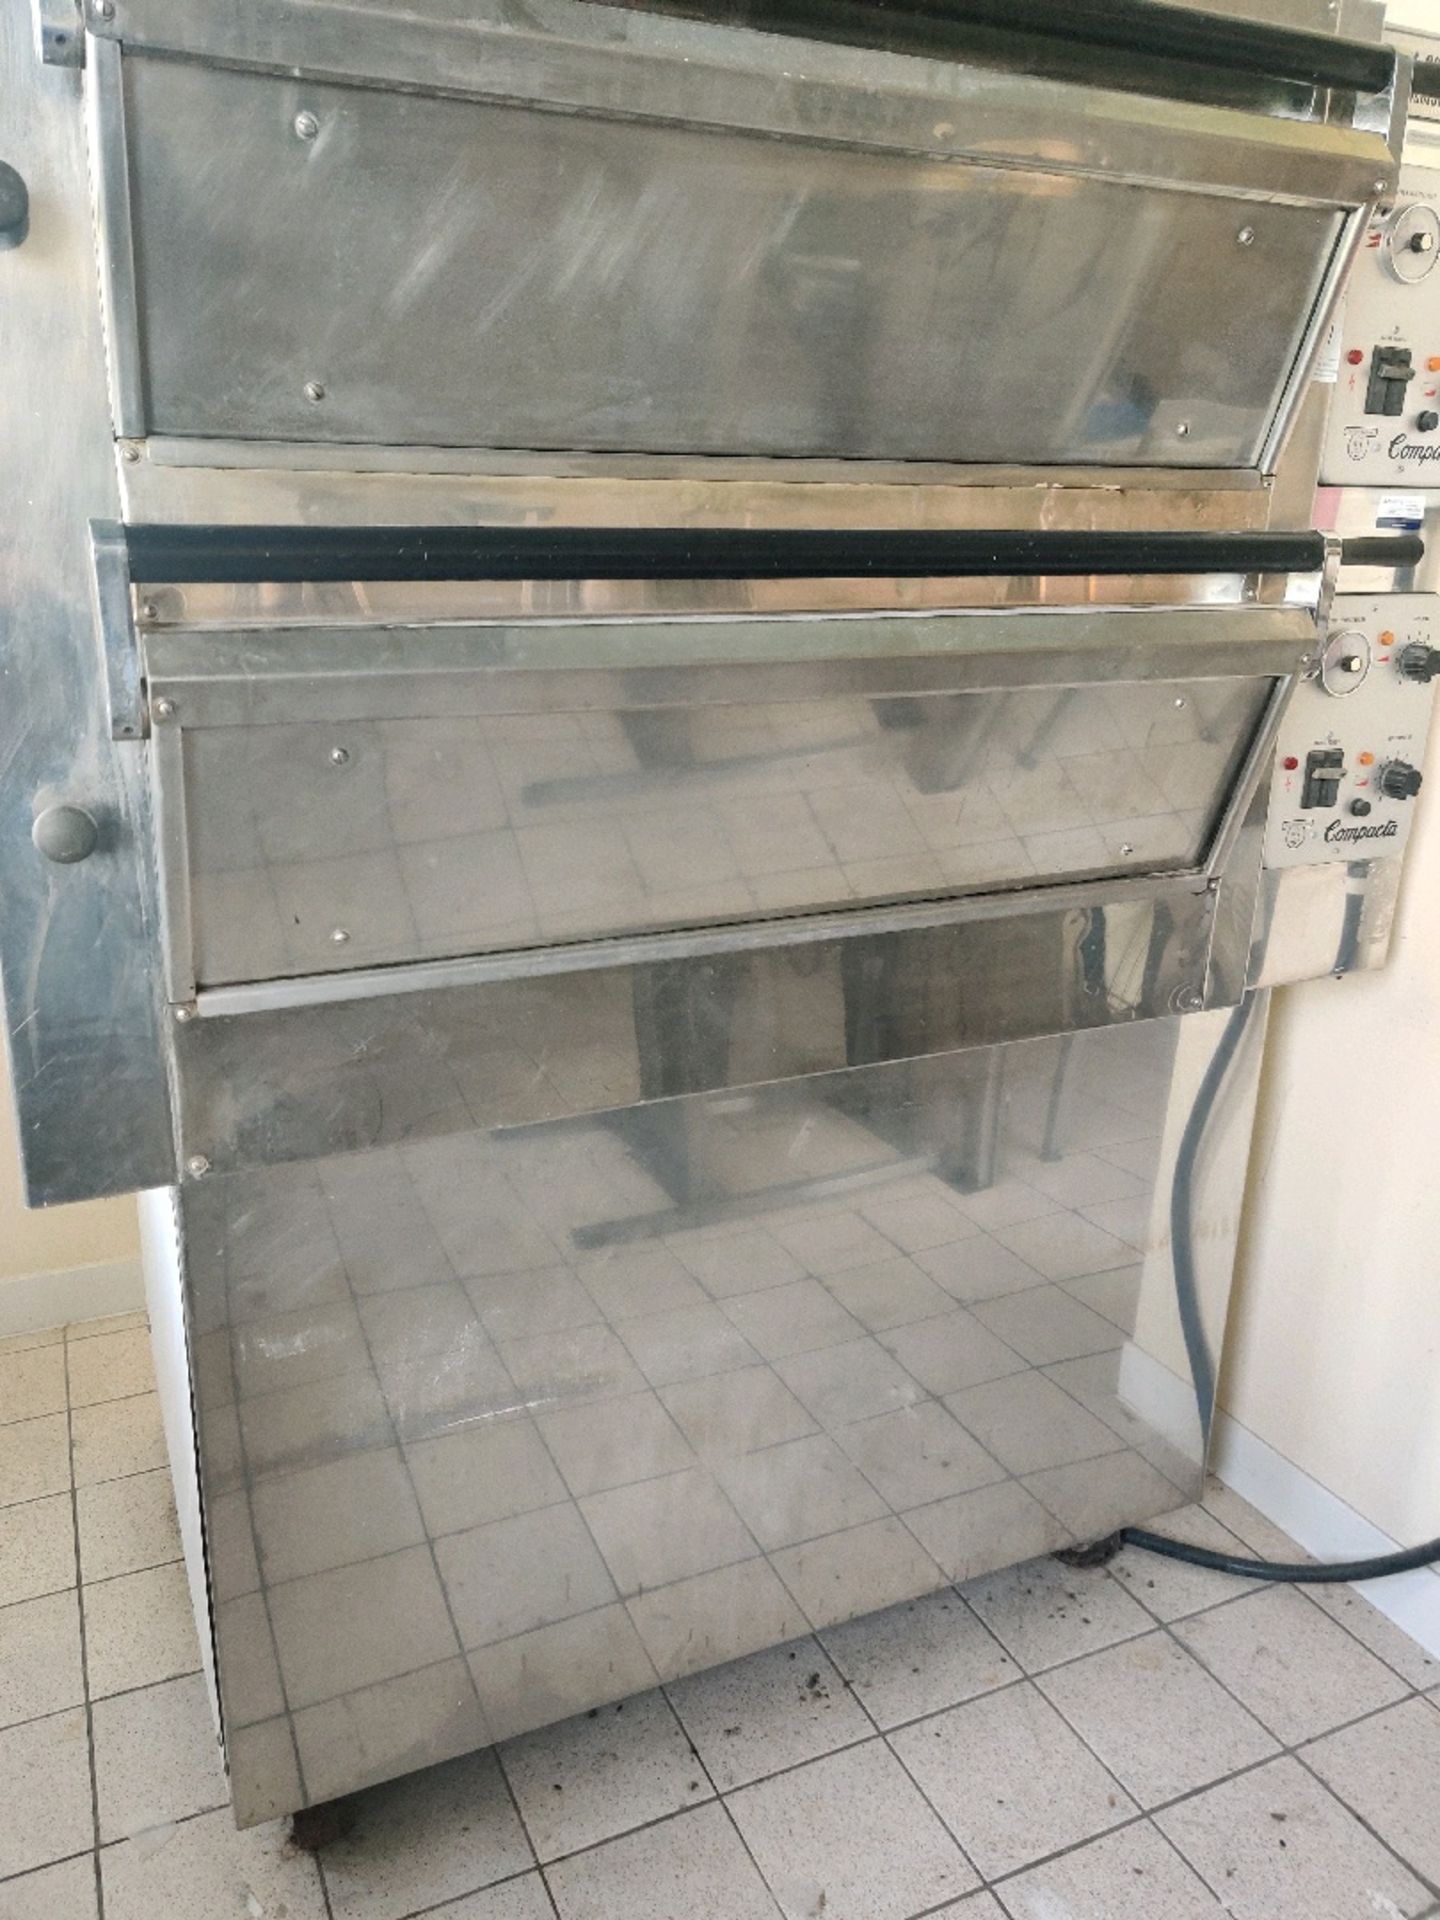 Tom chandley compacta oven - Image 4 of 4